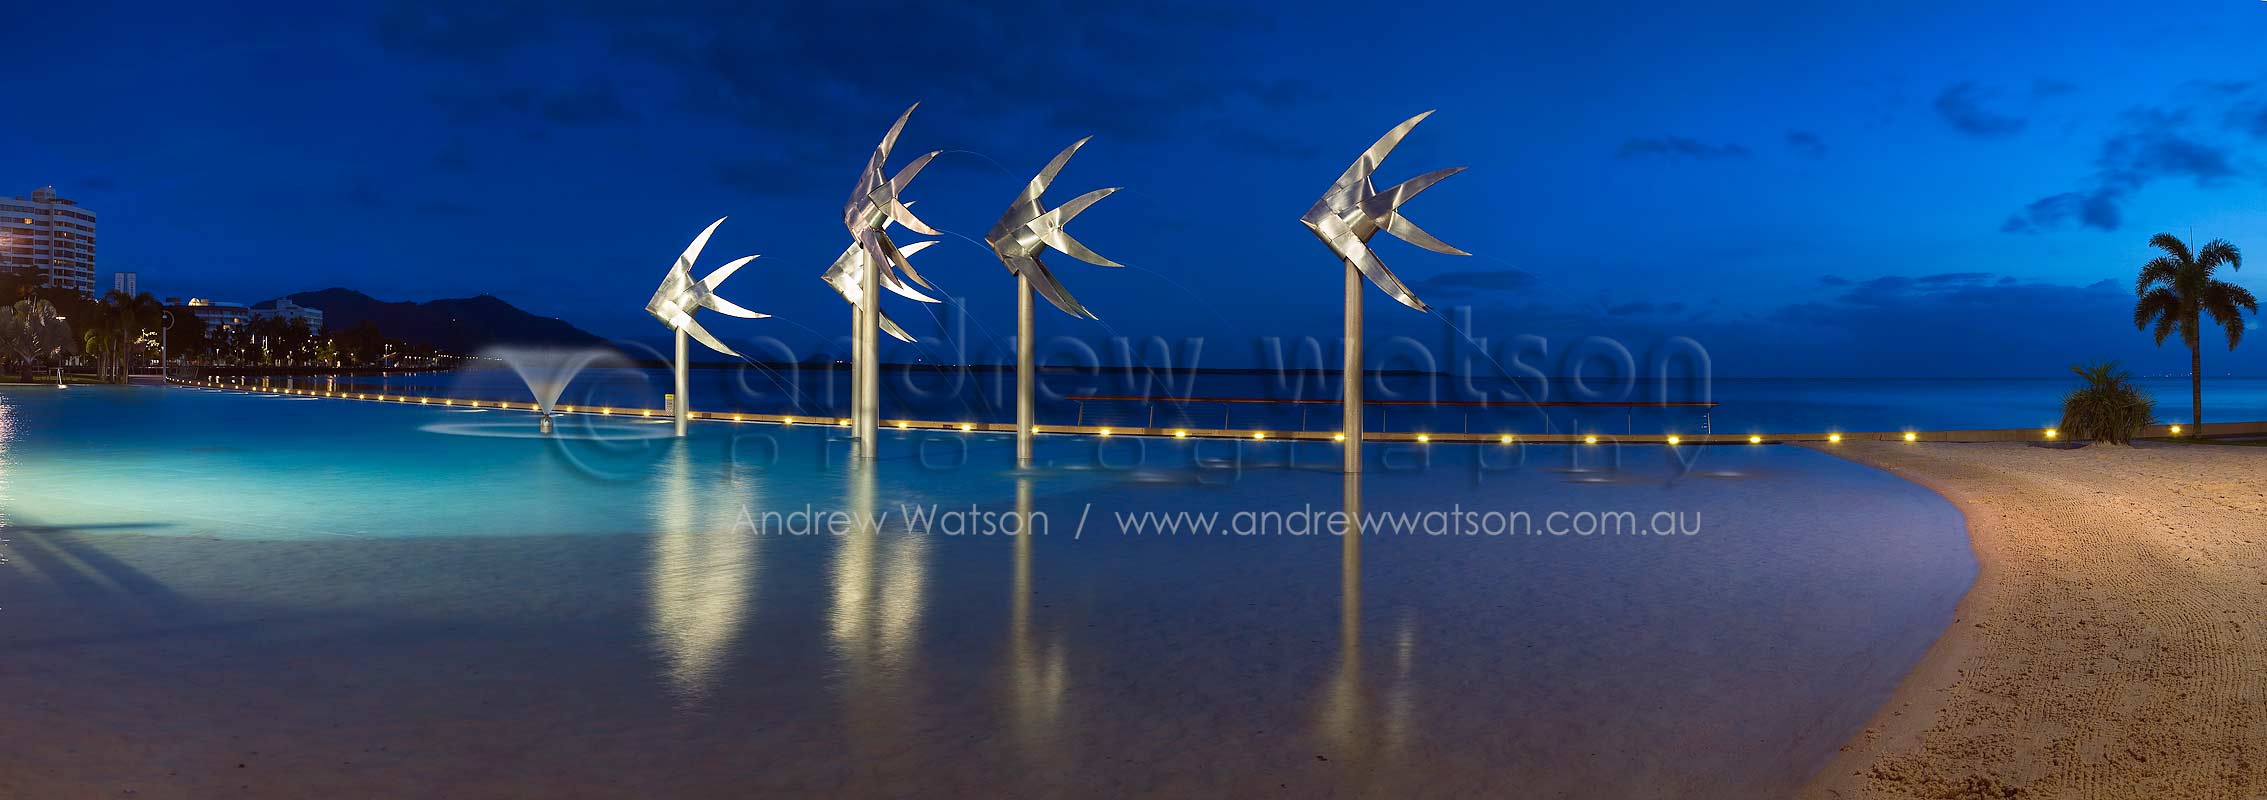 Panoramic image of fish sculpture in the Cairns Esplanade Lagoon at twilight.